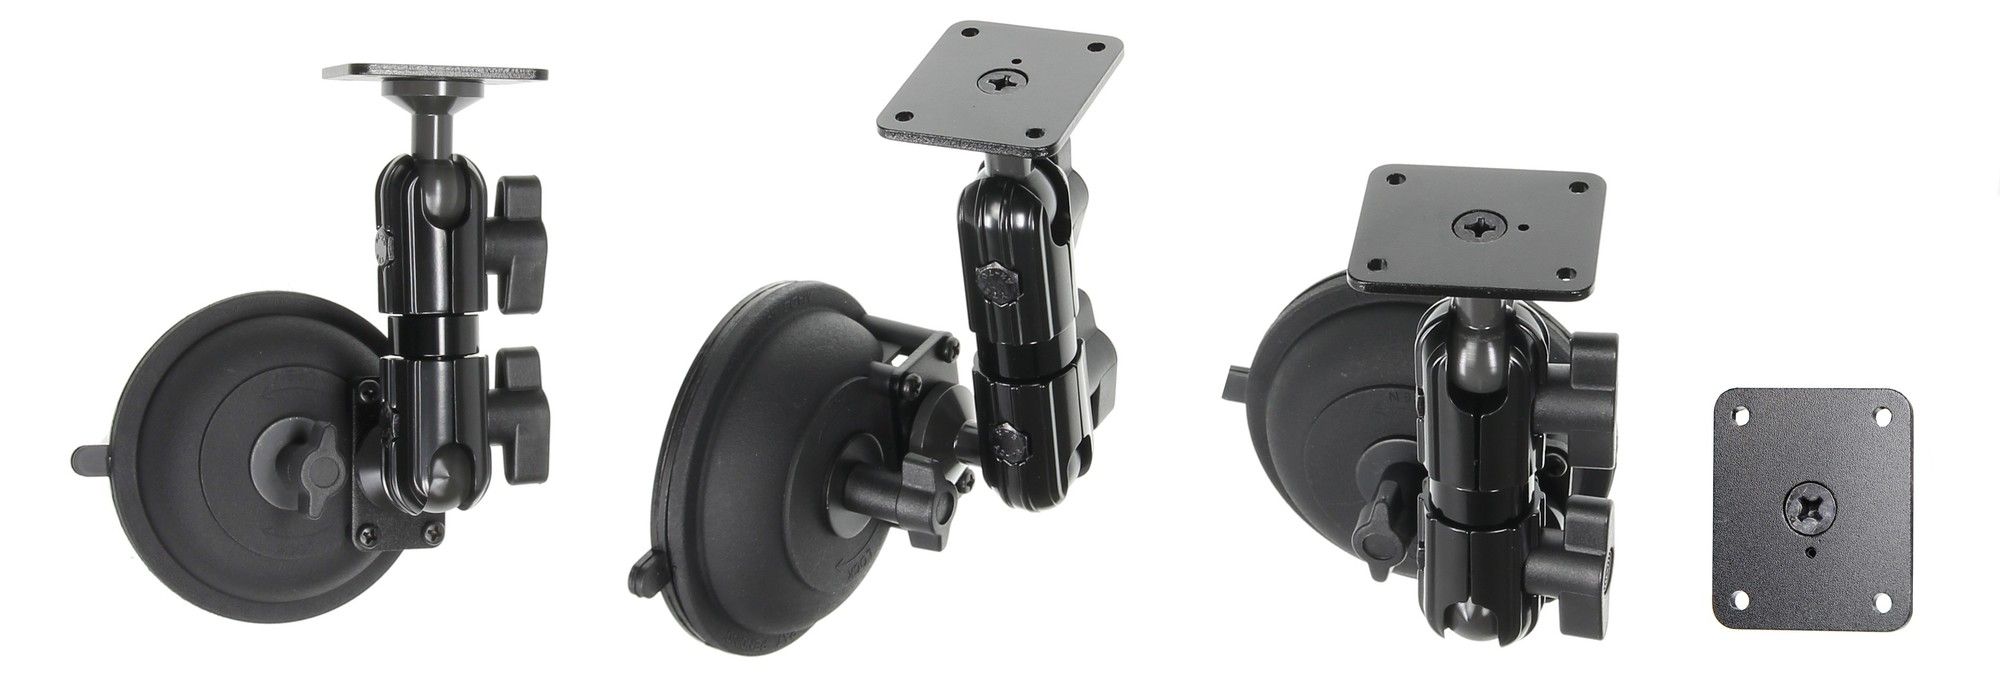 Brodit suction cup mount ø90mm, 160mm